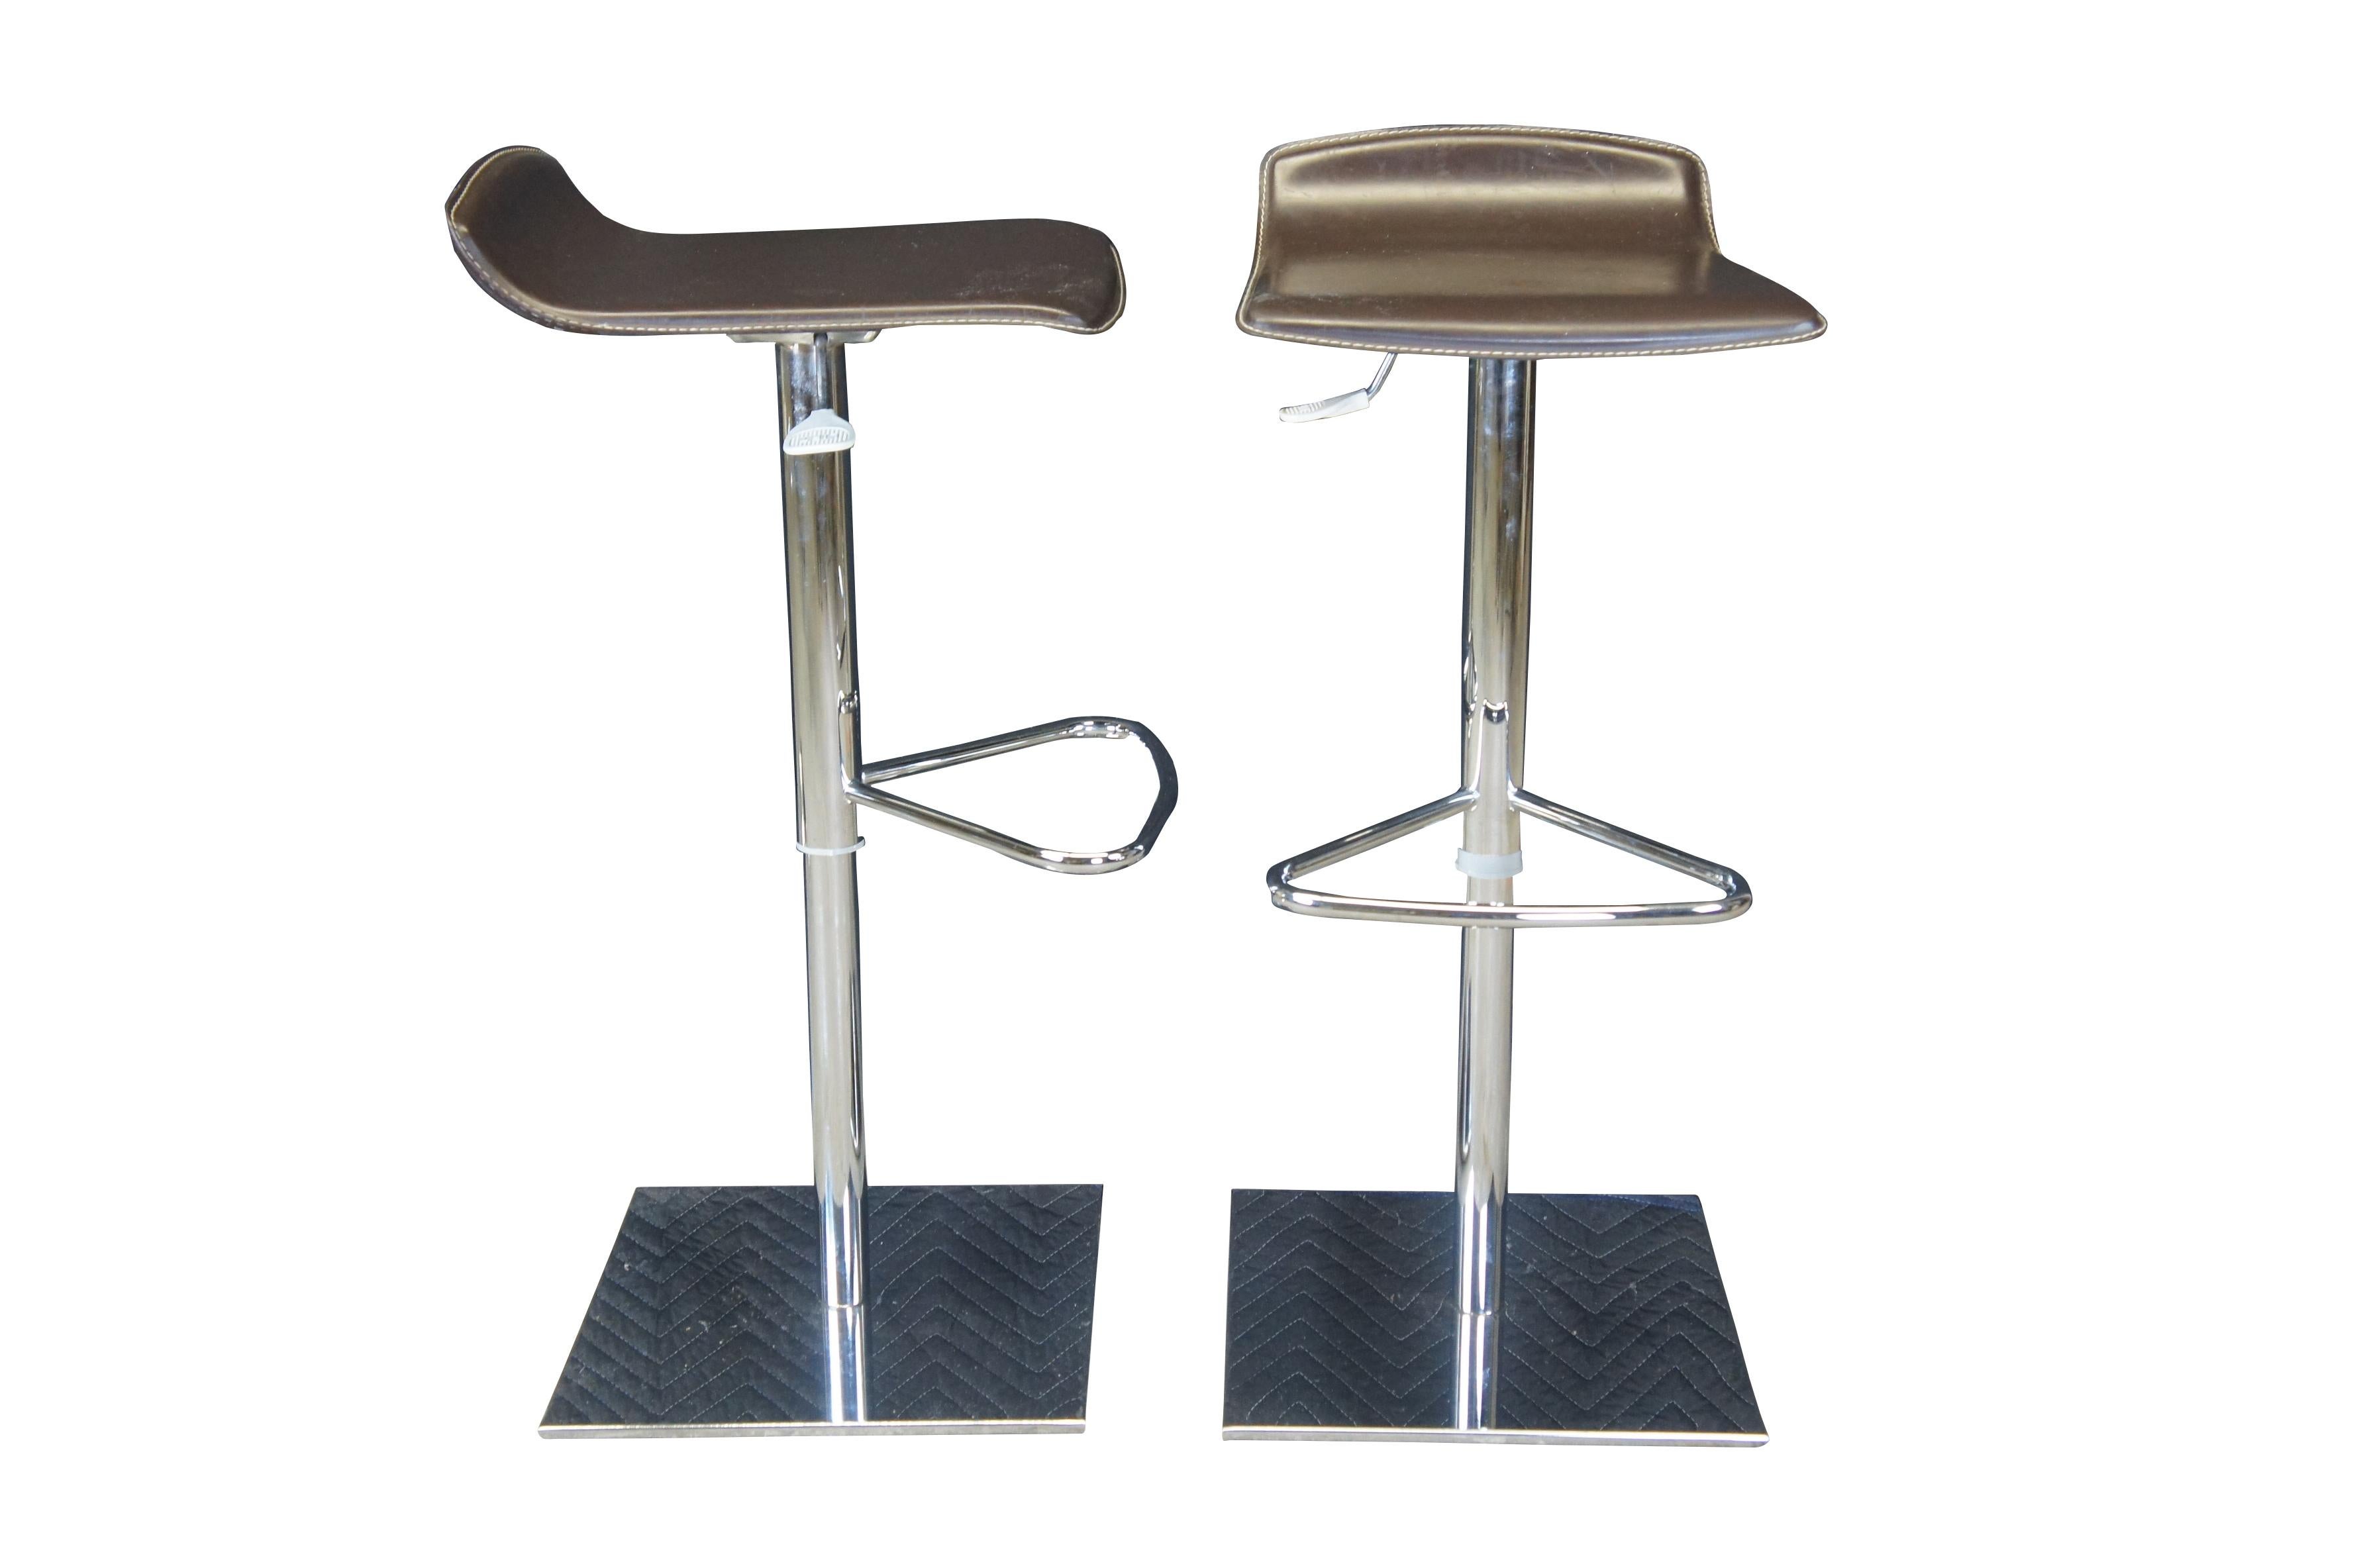 A lovely set of 5 Italian bar stools by Frontgate. Features a streamline form with a chrome frame with foot rests and contoured brown leather seats. The stools have adjustable hydraulics allowing for versatility. 

DIMENSIONS

17